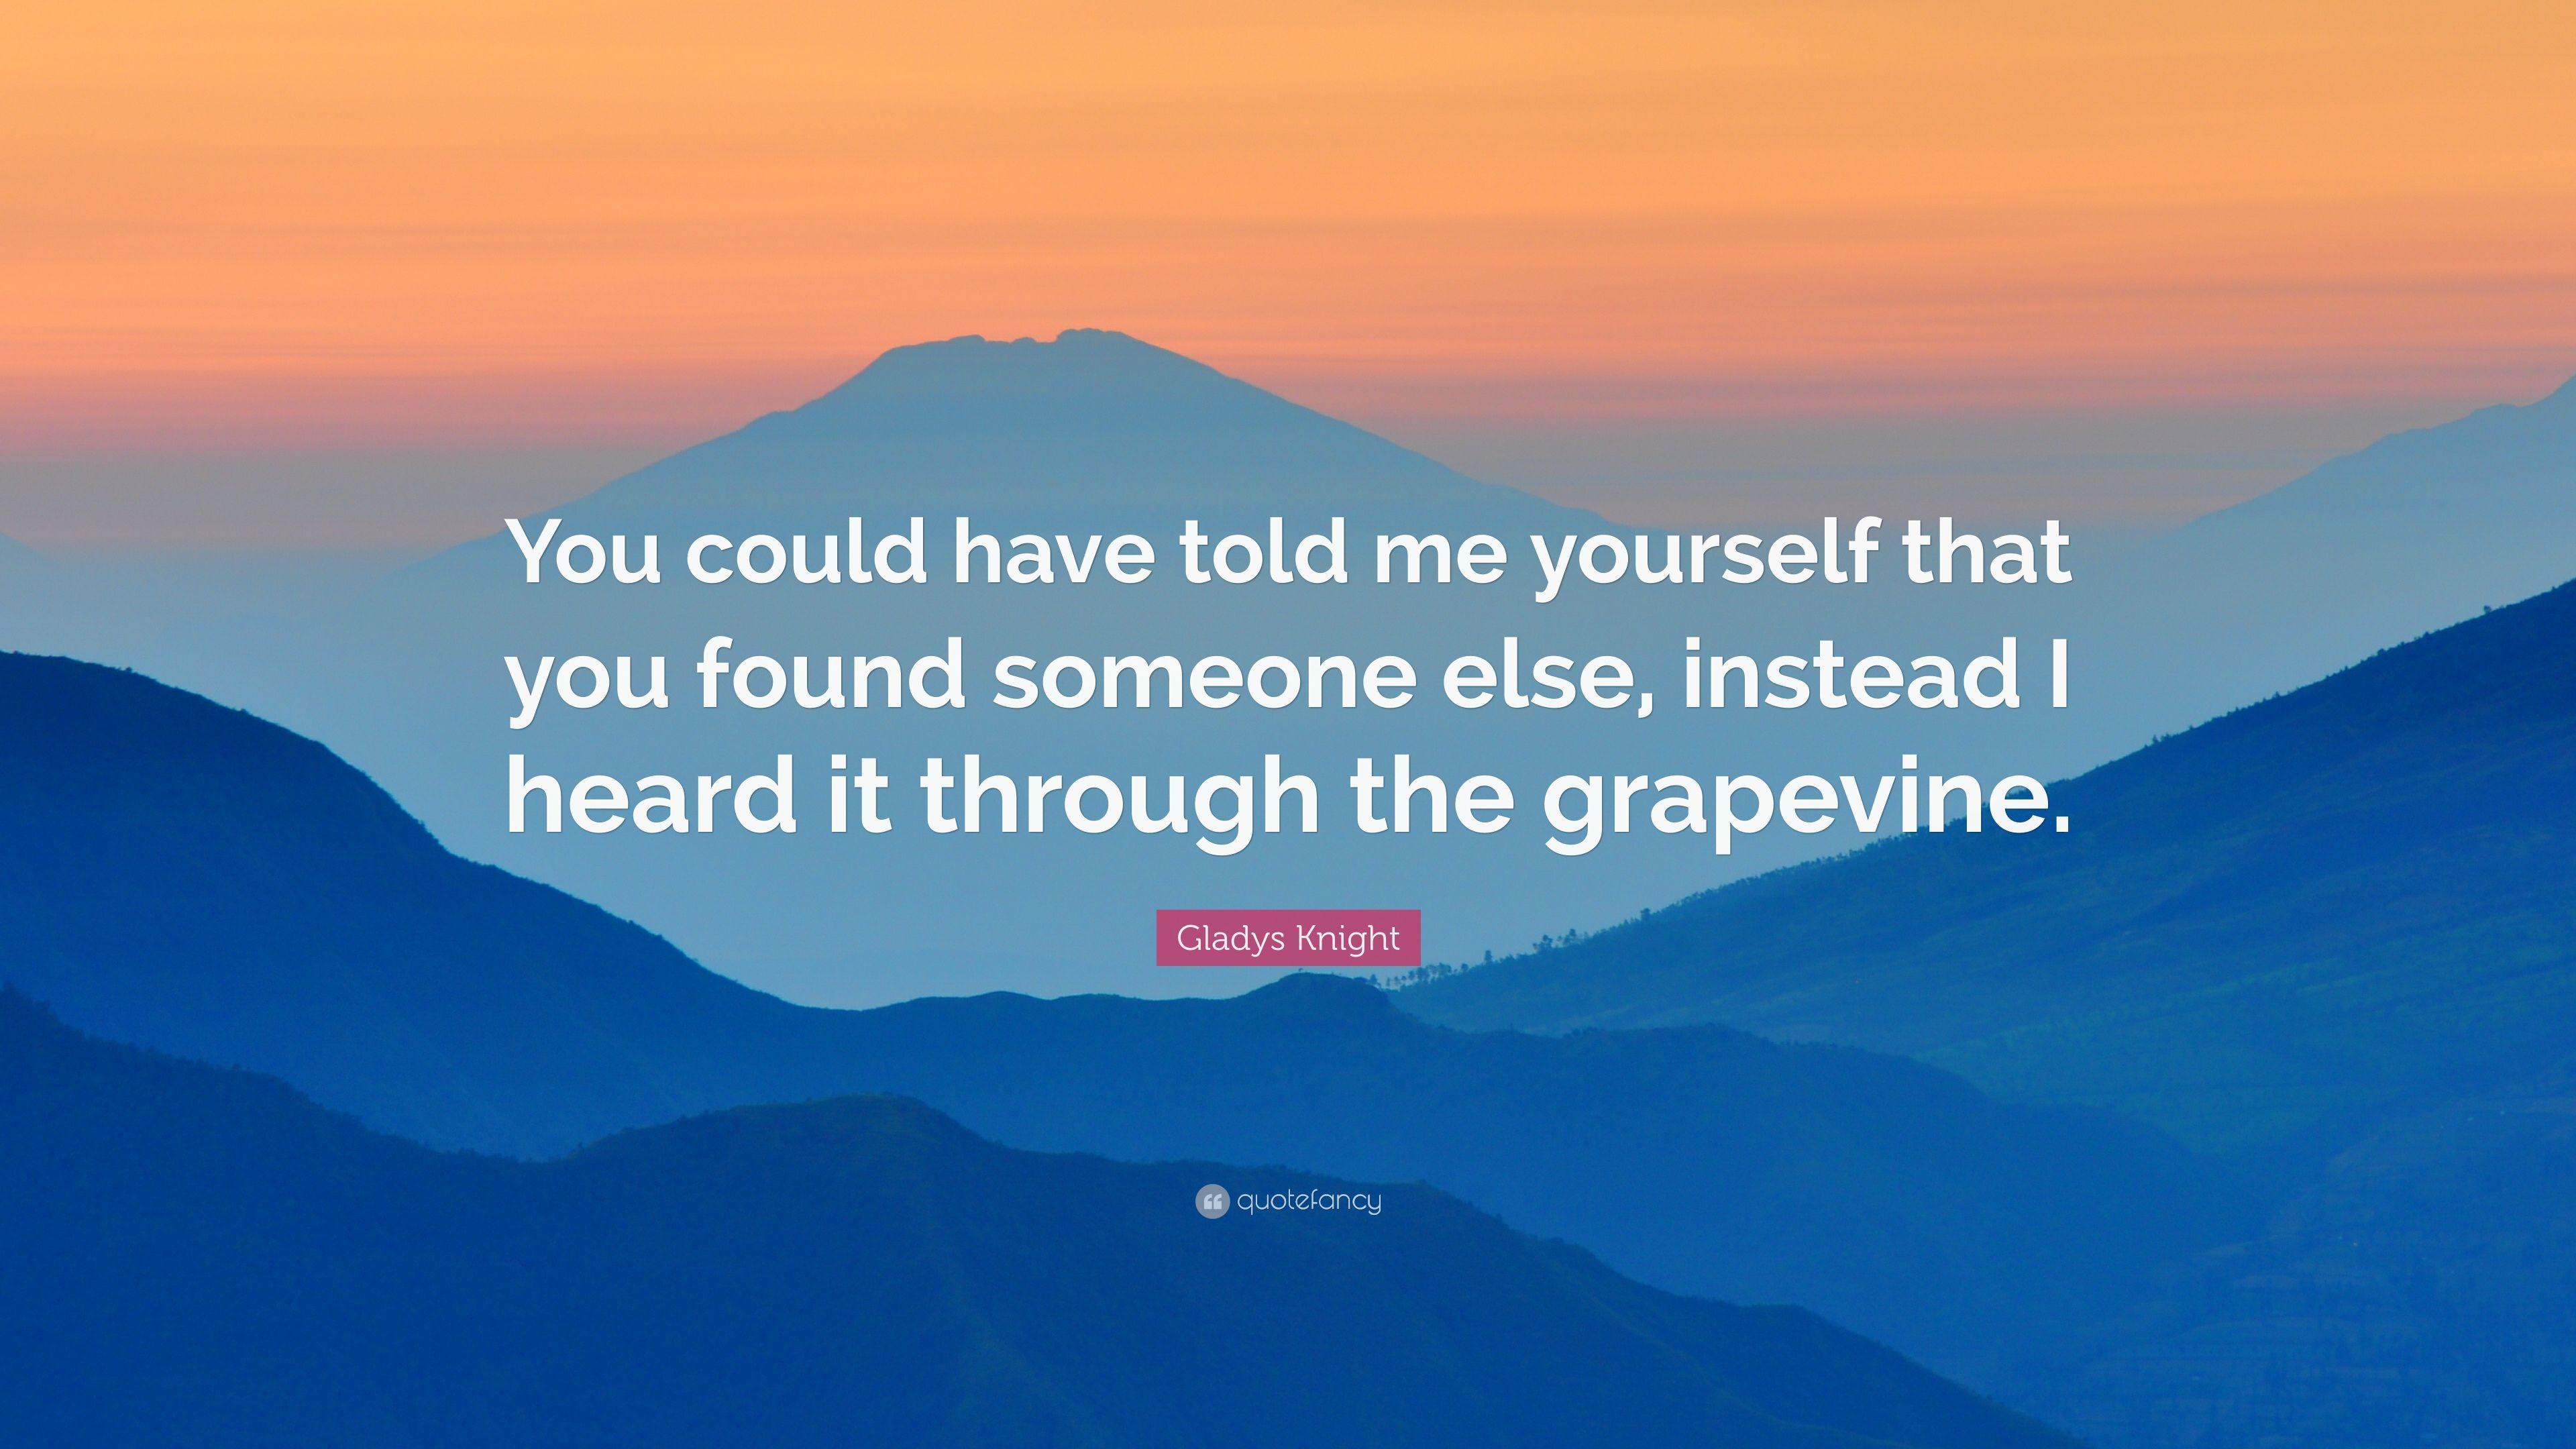 Gladys Knight Quote: “You could have told me yourself that you found